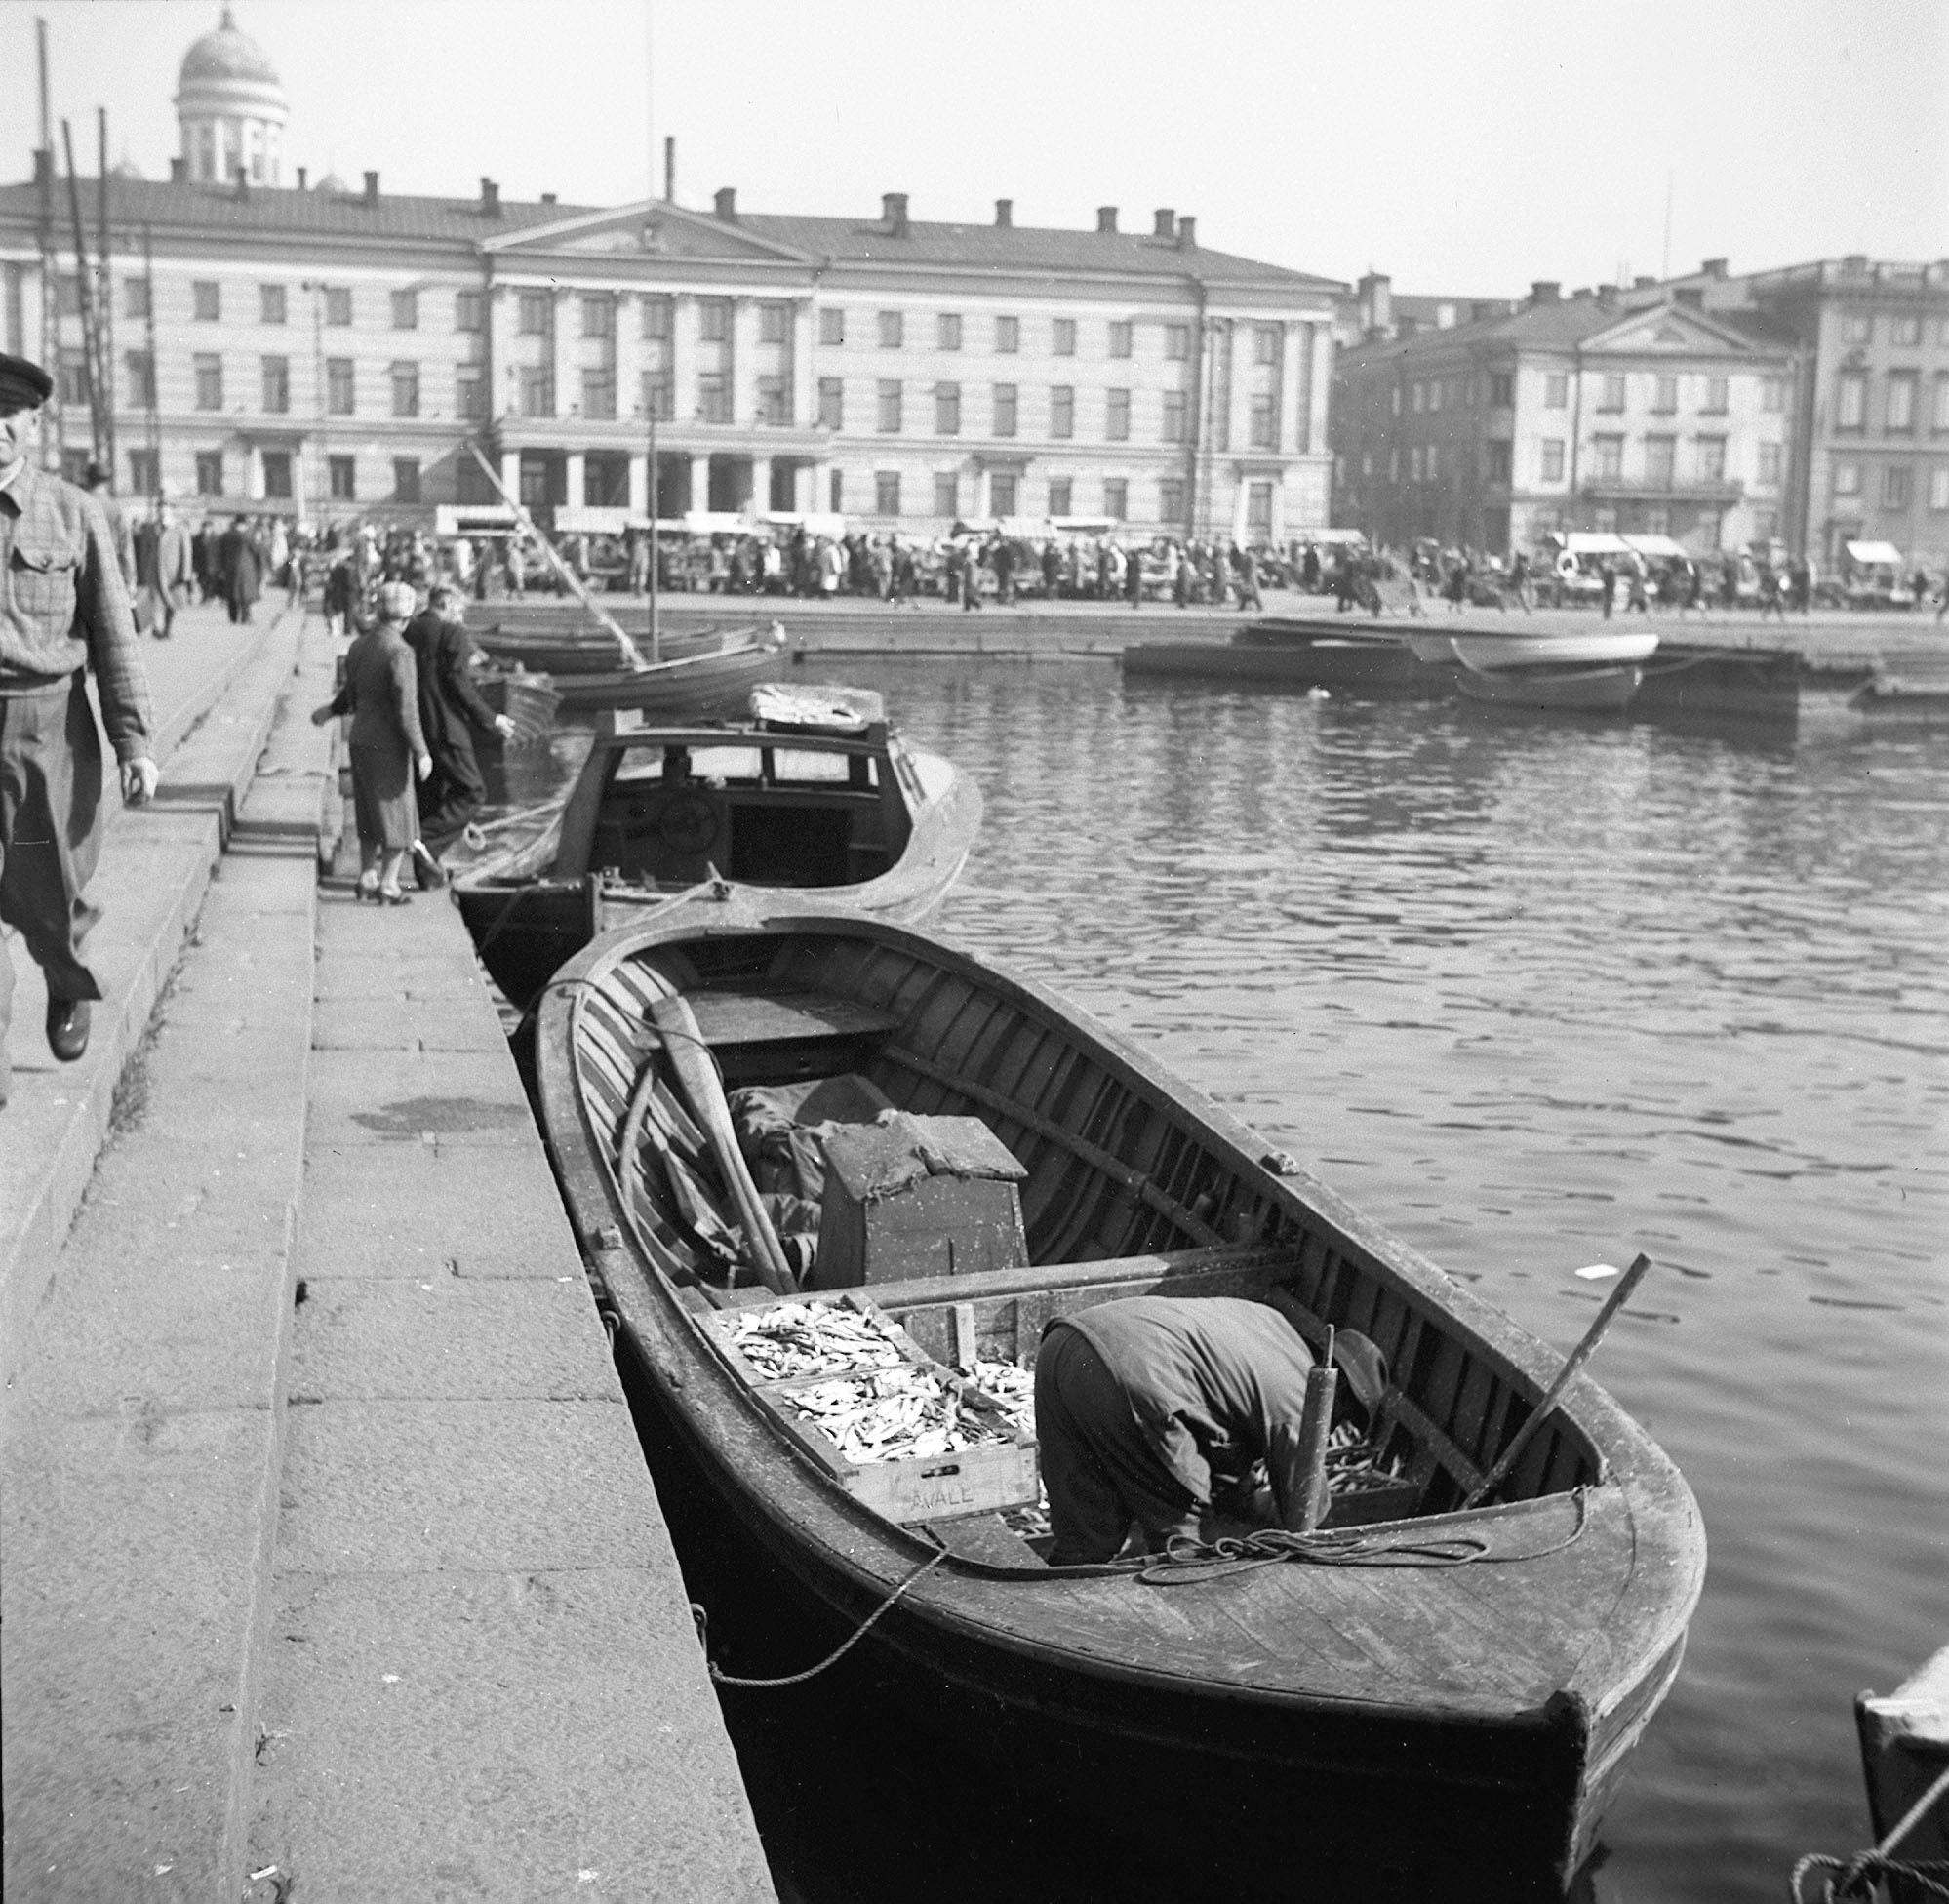 Helsinki marketplace 1947 (28913411802) - Helsinki, Kauppatori 2.6.1947. Fishing boats.Photo: Ruth Träskman/Yle.
Do you know something about this picture? Please leave a comment or contact us by e-mail: flickr@yle.fi Read more about Yle, the Finnish Broadcasting Company: http://yle.fi/life park Fler skatter från Yles archive: http://svenska.yle.fi/arkivet More about Yle, the Finnish Broadcasting Company: http://yle.fi/yleisradio/ About-yle/this-is-yle